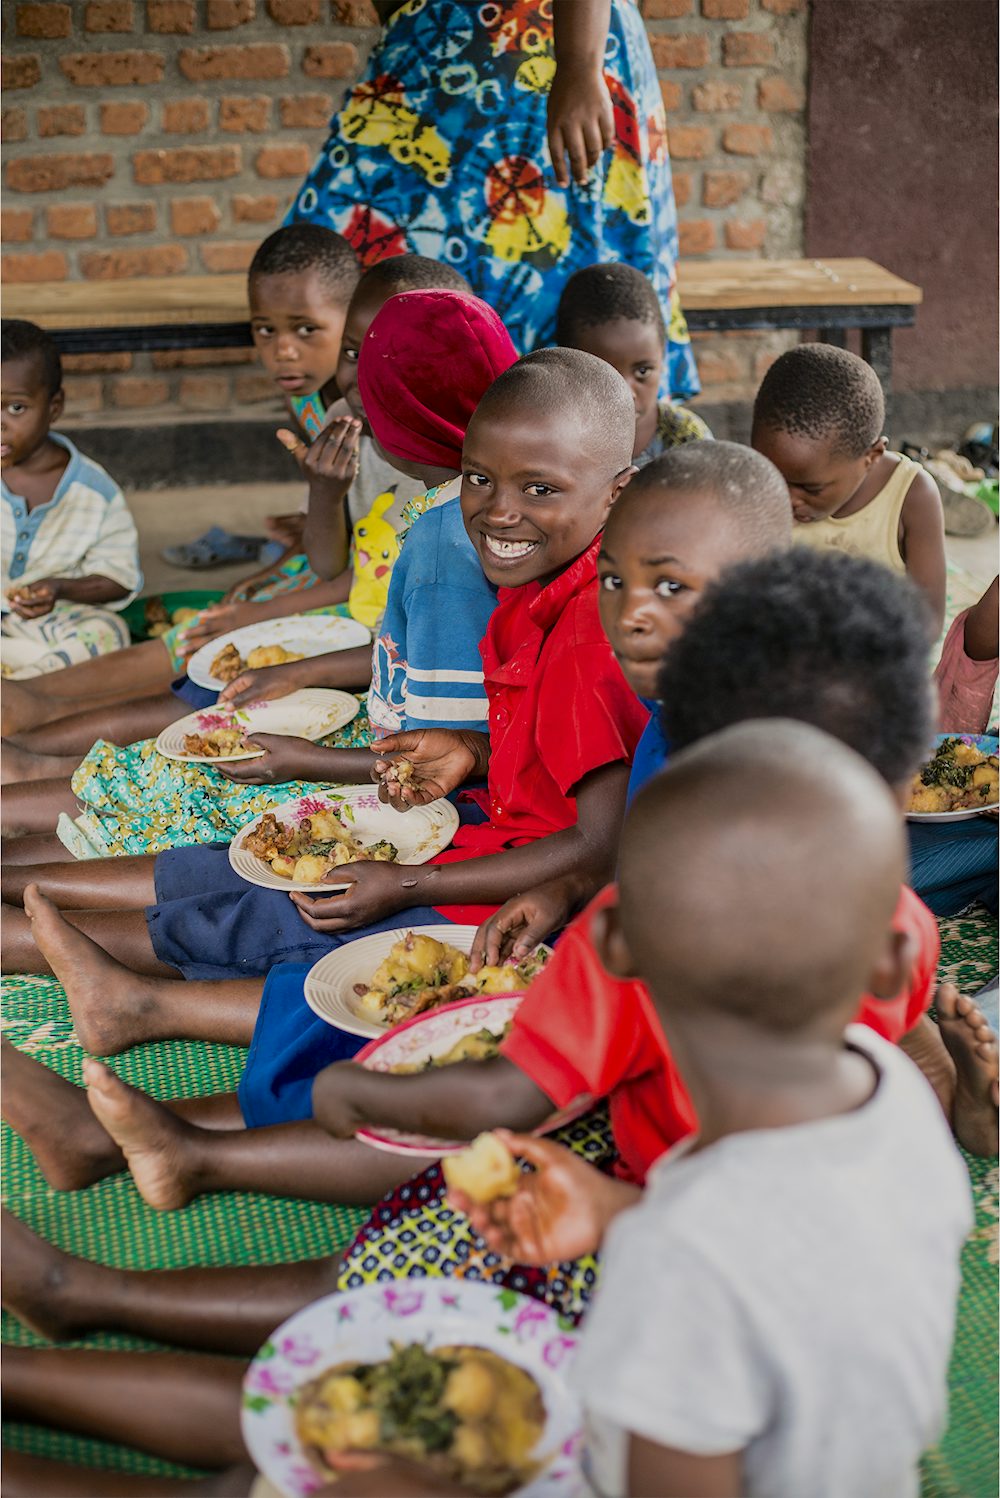 A group of children sit together and enjoy a meal.